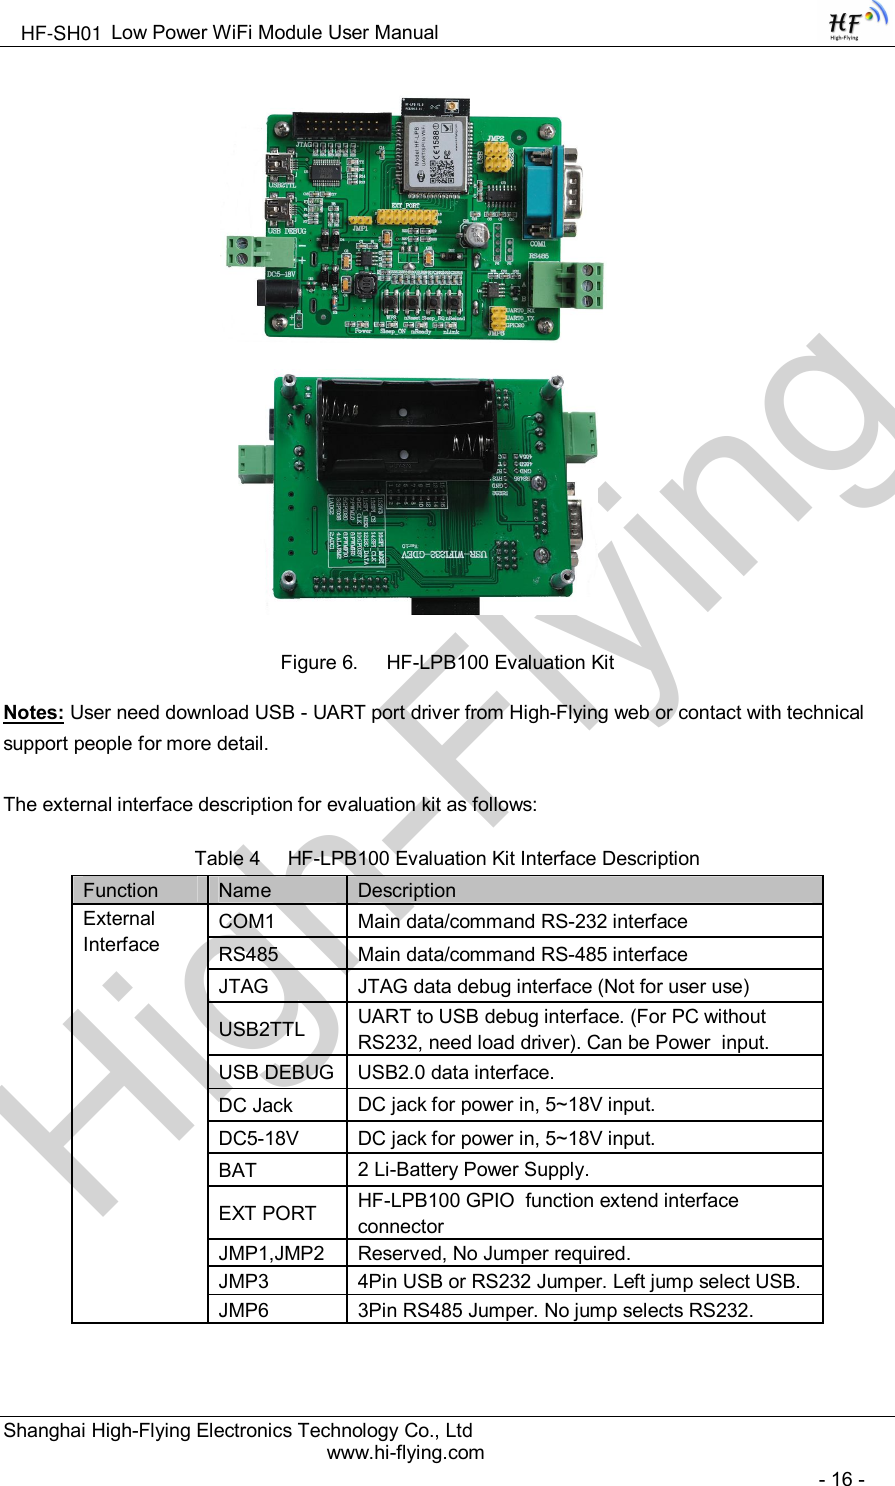 High-FlyingLow Power WiFi Module User ManualShanghai High-Flying Electronics Technology Co., Ltdwww.hi-flying.com- 16 -Figure 6. HF-LPB100 Evaluation KitNotes: User need download USB - UART port driver from High-Flying web or contact with technicalsupport people for more detail.The external interface description for evaluation kit as follows:Table 4 HF-LPB100 Evaluation Kit Interface DescriptionFunction Name DescriptionExternalInterfaceCOM1 Main data/command RS-232 interfaceRS485 Main data/command RS-485 interfaceJTAG JTAG data debug interface (Not for user use)USB2TTL UART to USB debug interface. (For PC withoutRS232, need load driver). Can be Power  input.USB DEBUG USB2.0 data interface.DC Jack DC jack for power in, 5~18V input.DC5-18V DC jack for power in, 5~18V input.BAT 2 Li-Battery Power Supply.EXT PORT HF-LPB100 GPIO function extend interfaceconnectorJMP1,JMP2 Reserved, No Jumper required.JMP3 4Pin USB or RS232 Jumper. Left jump select USB.JMP6 3Pin RS485 Jumper. No jump selects RS232.HF-SH01